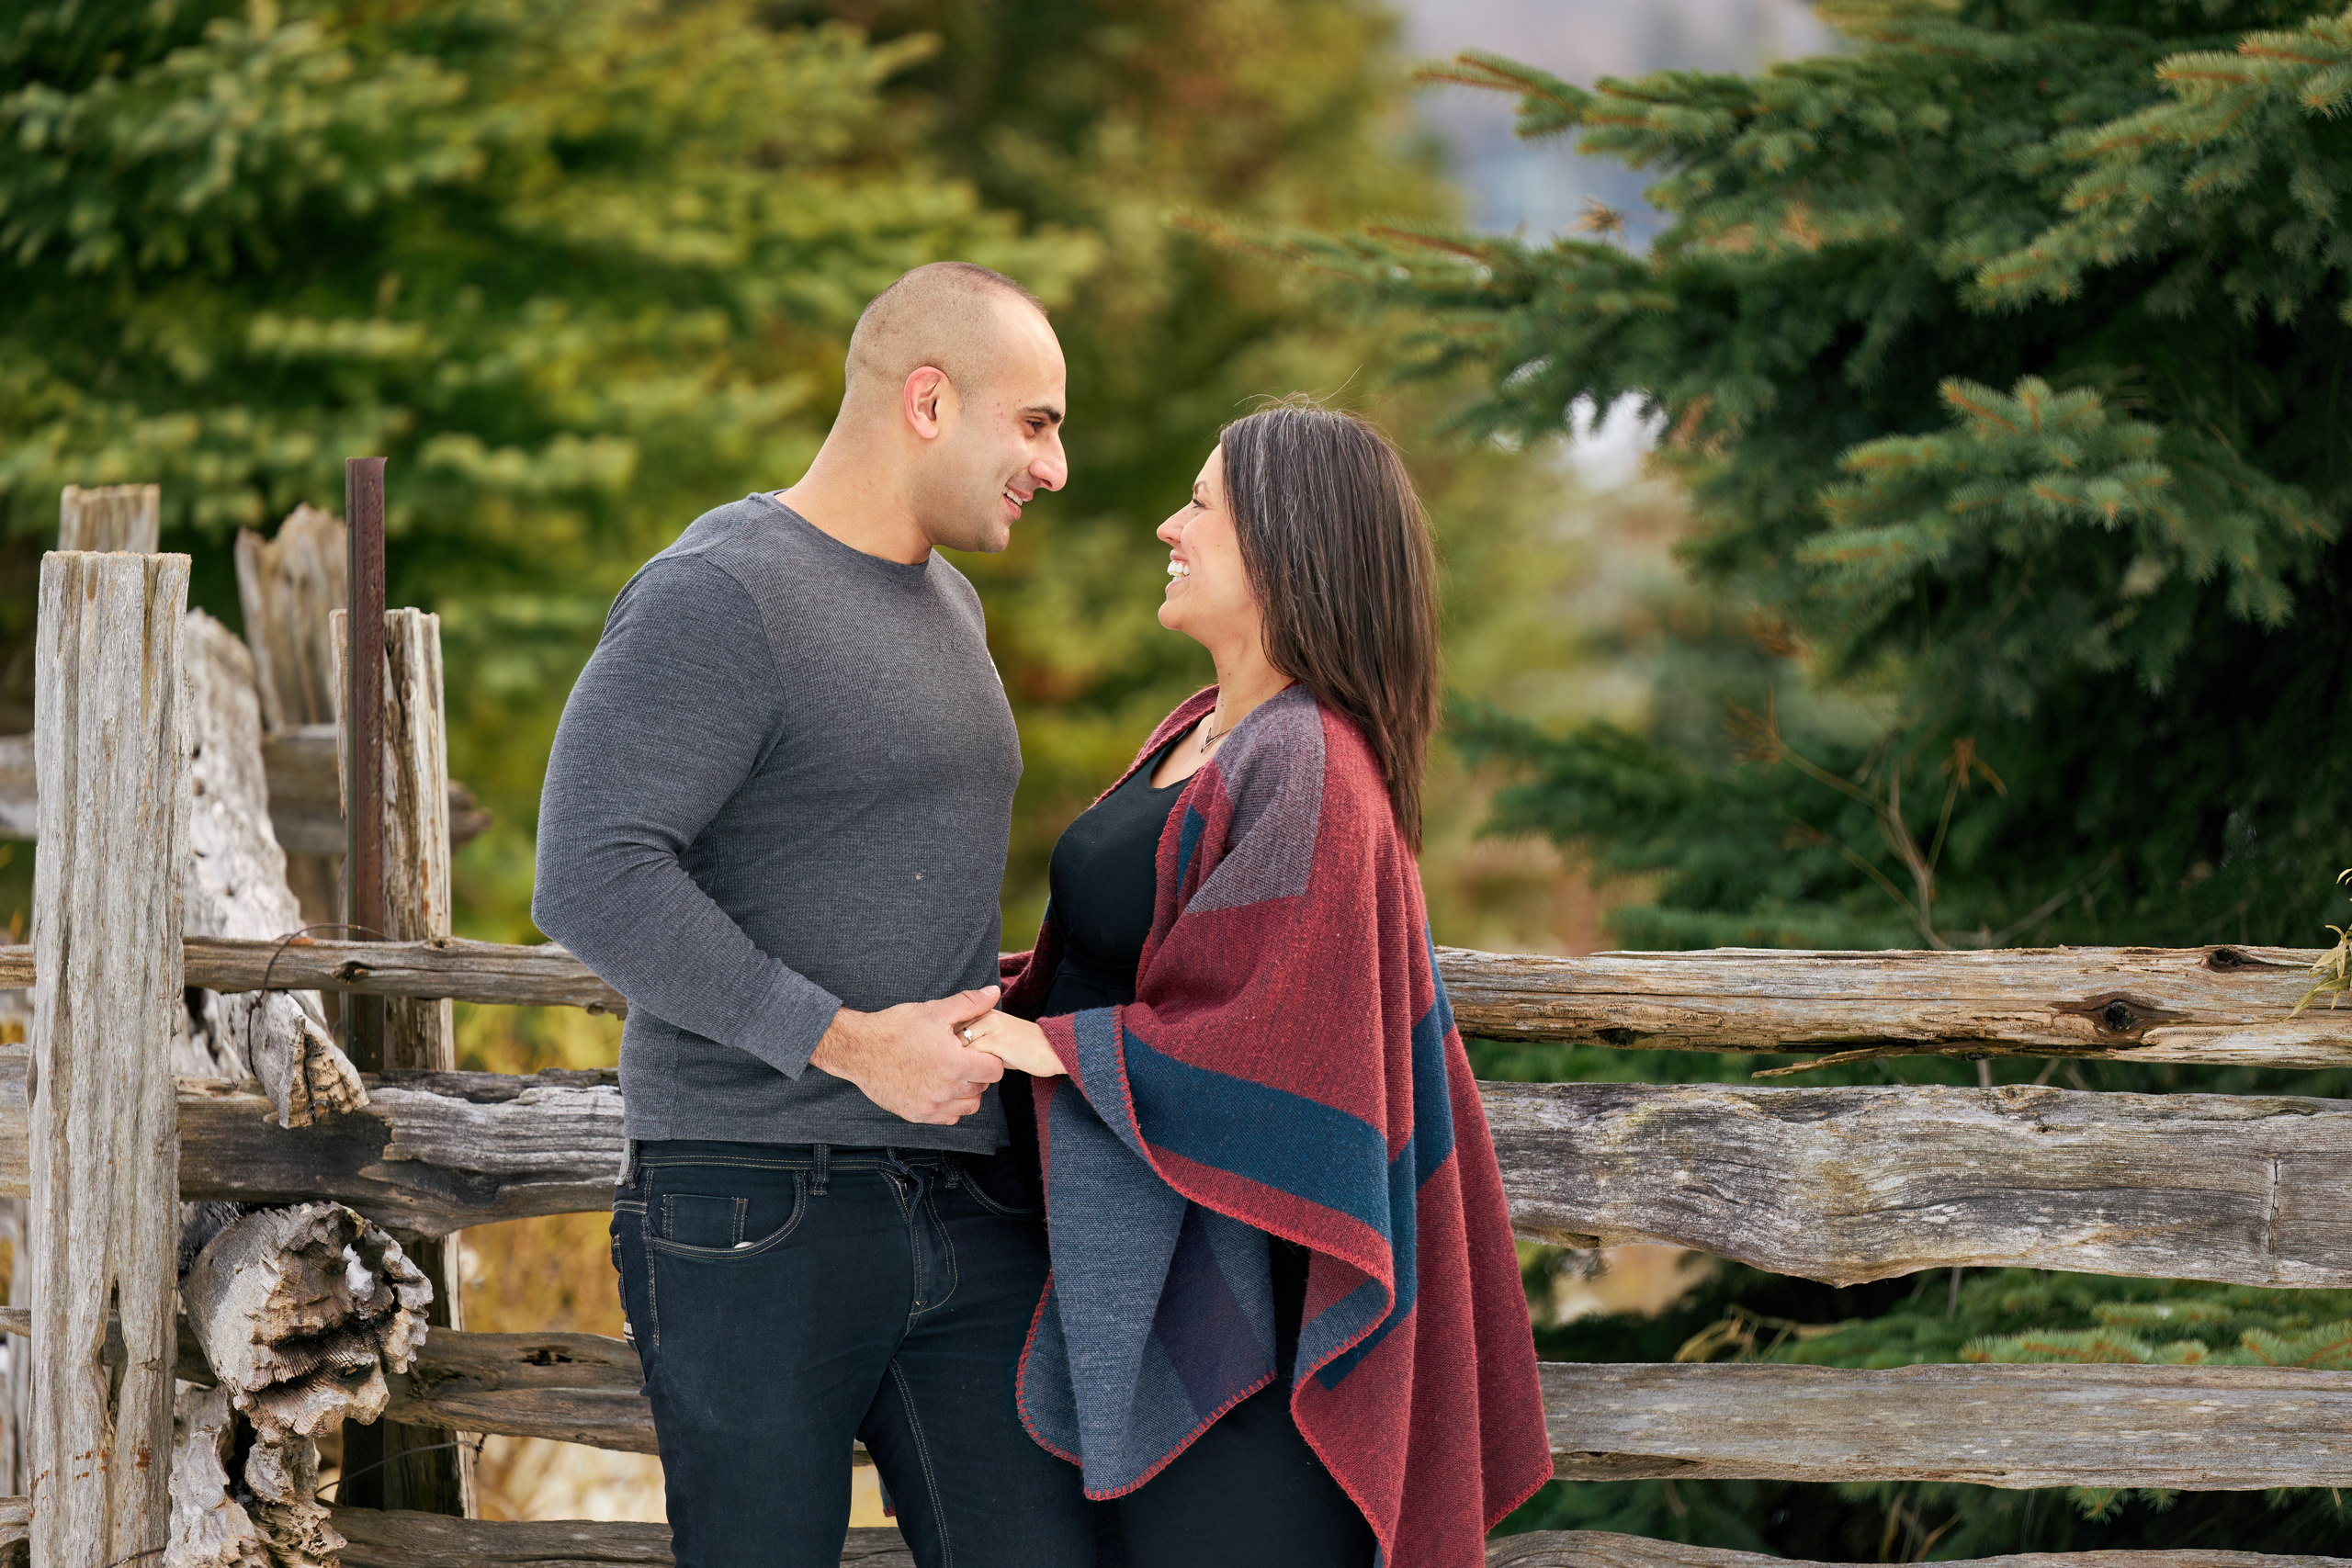 PROPOSAL AND ENGAGEMENT PHOTOGRAPHY AT BLUE MOUNTAIN VILLAGE